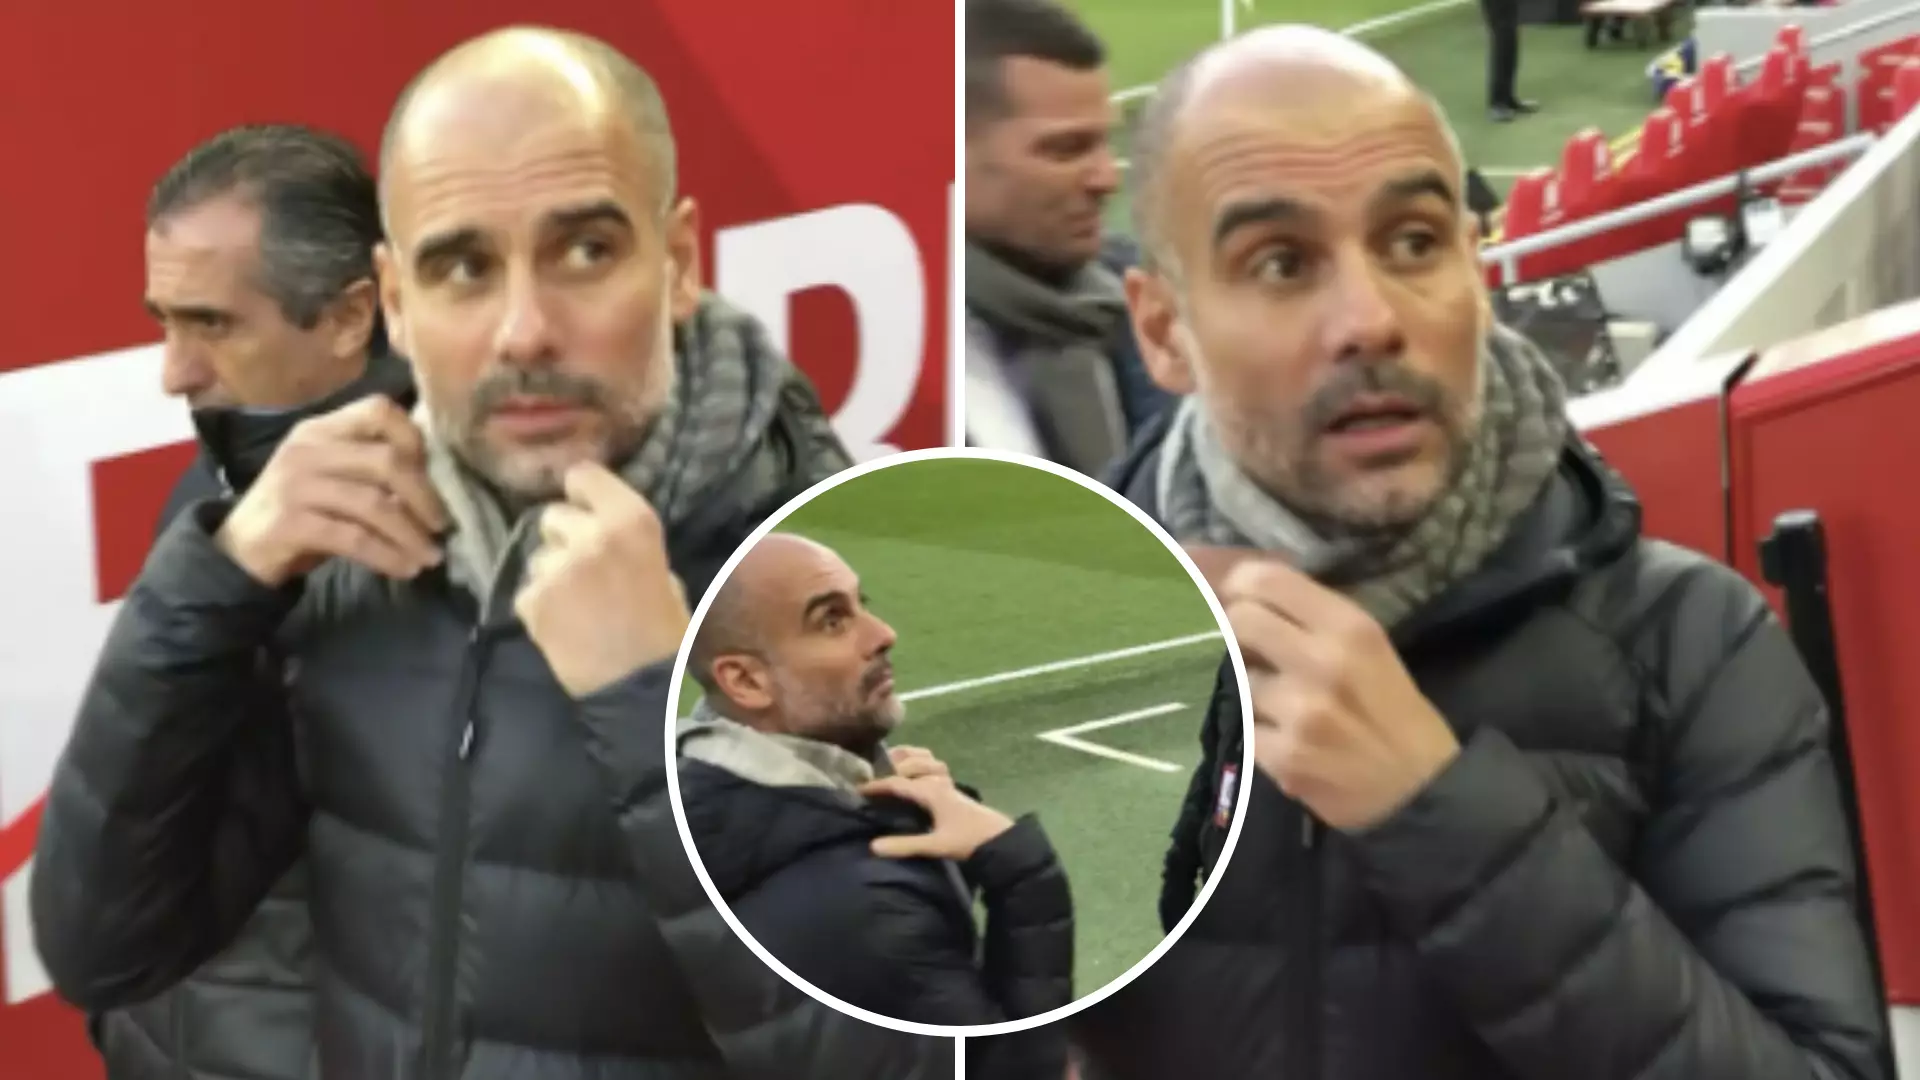 Liverpool Fan Tried To Rattle Pep Guardiola By Telling Him He Looked Scared Before Manchester City's Match